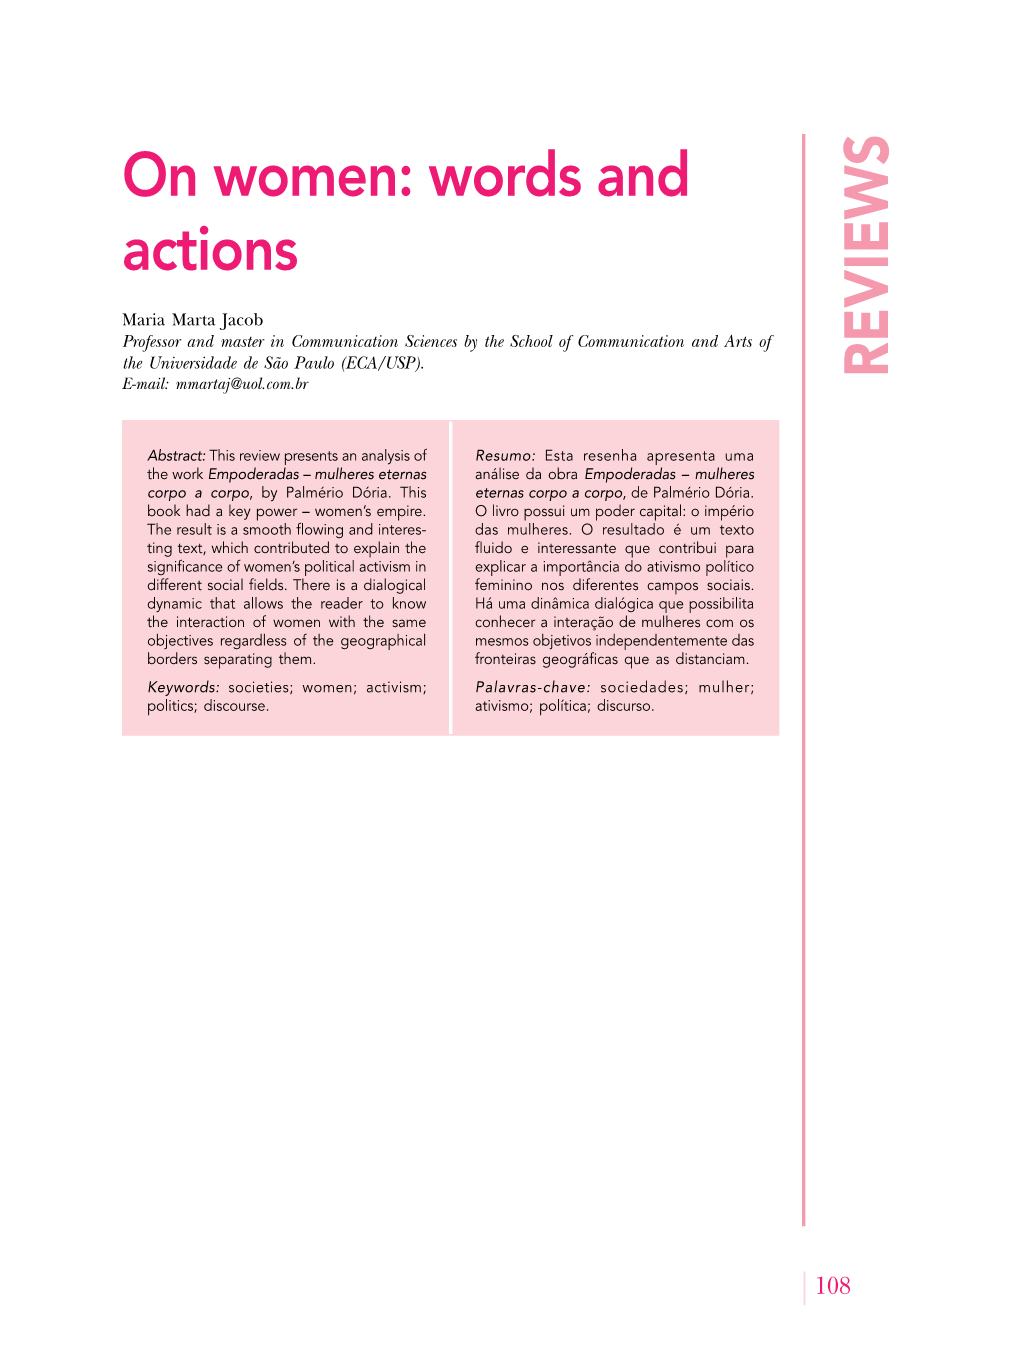 On Women: Words and Actions REVIEWS